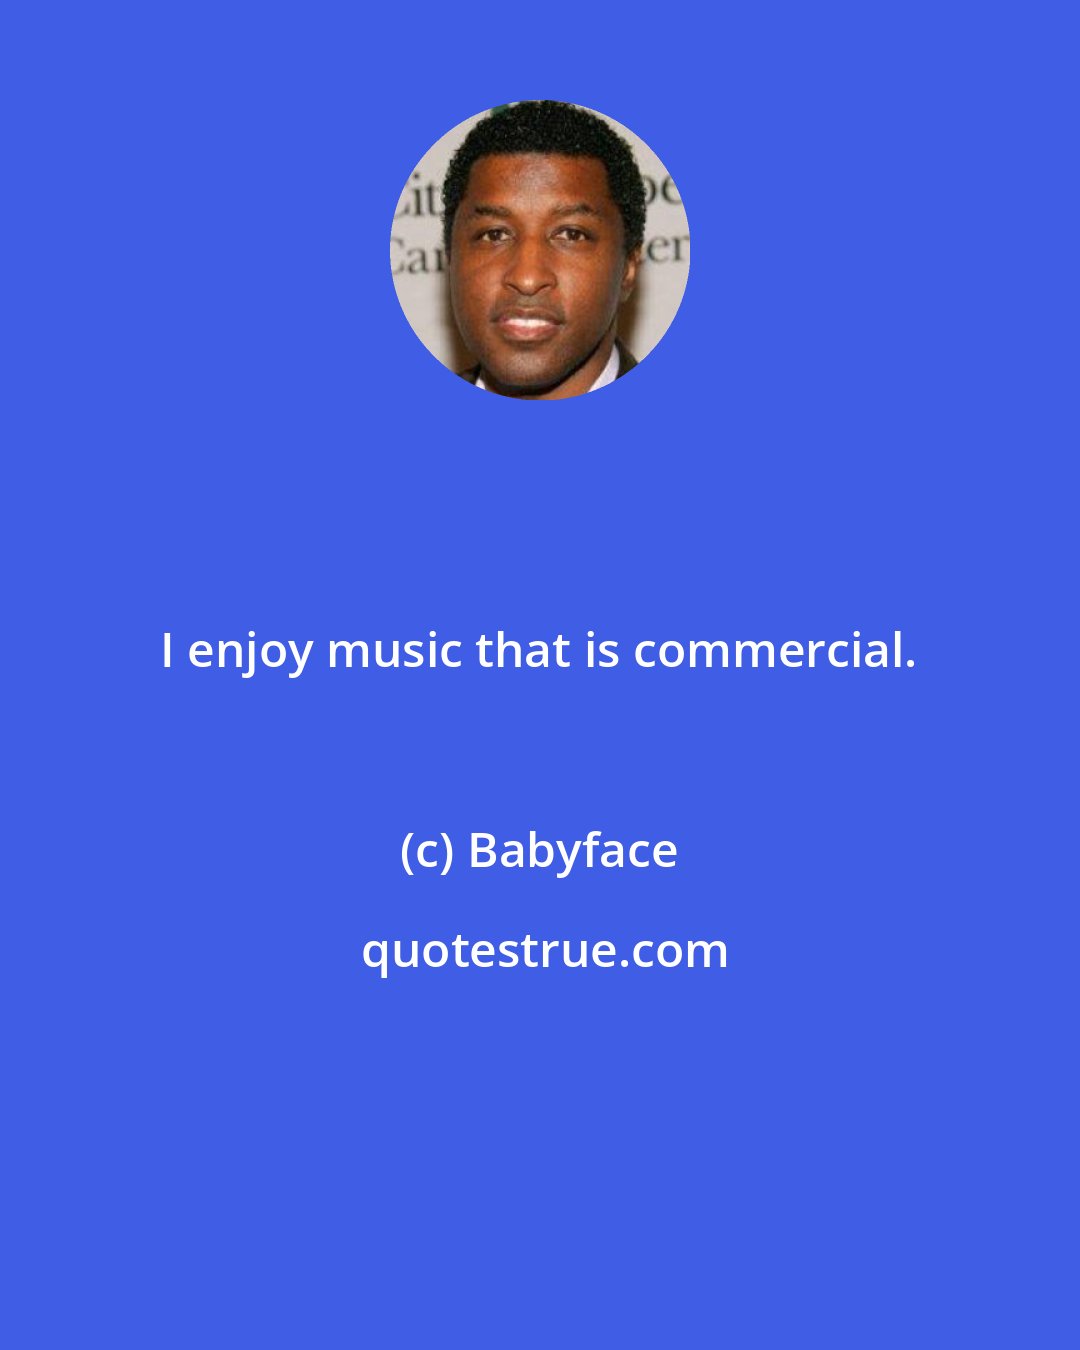 Babyface: I enjoy music that is commercial.